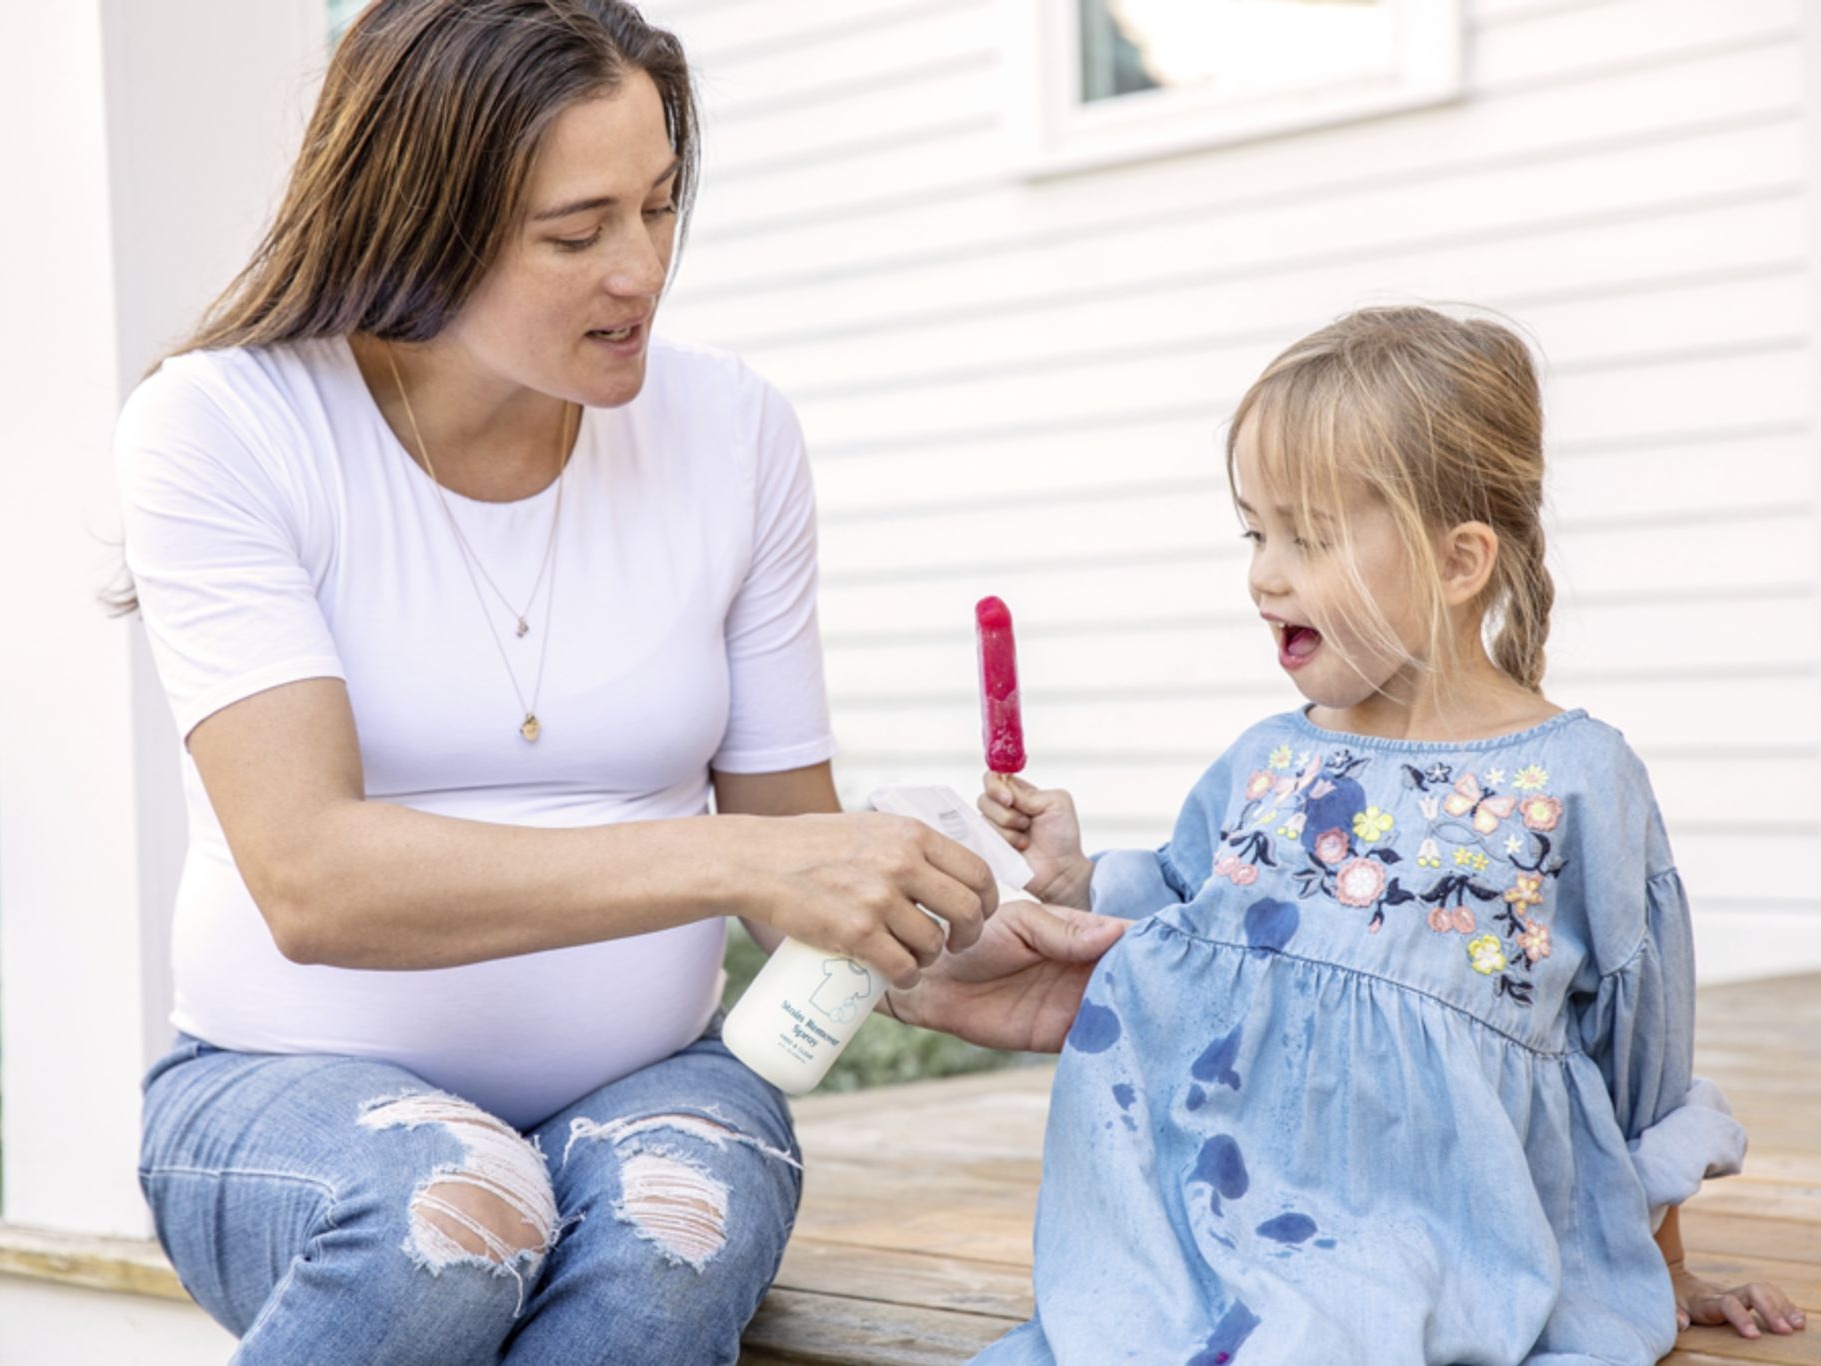 Image of a woman spraying stains on a child's clothes